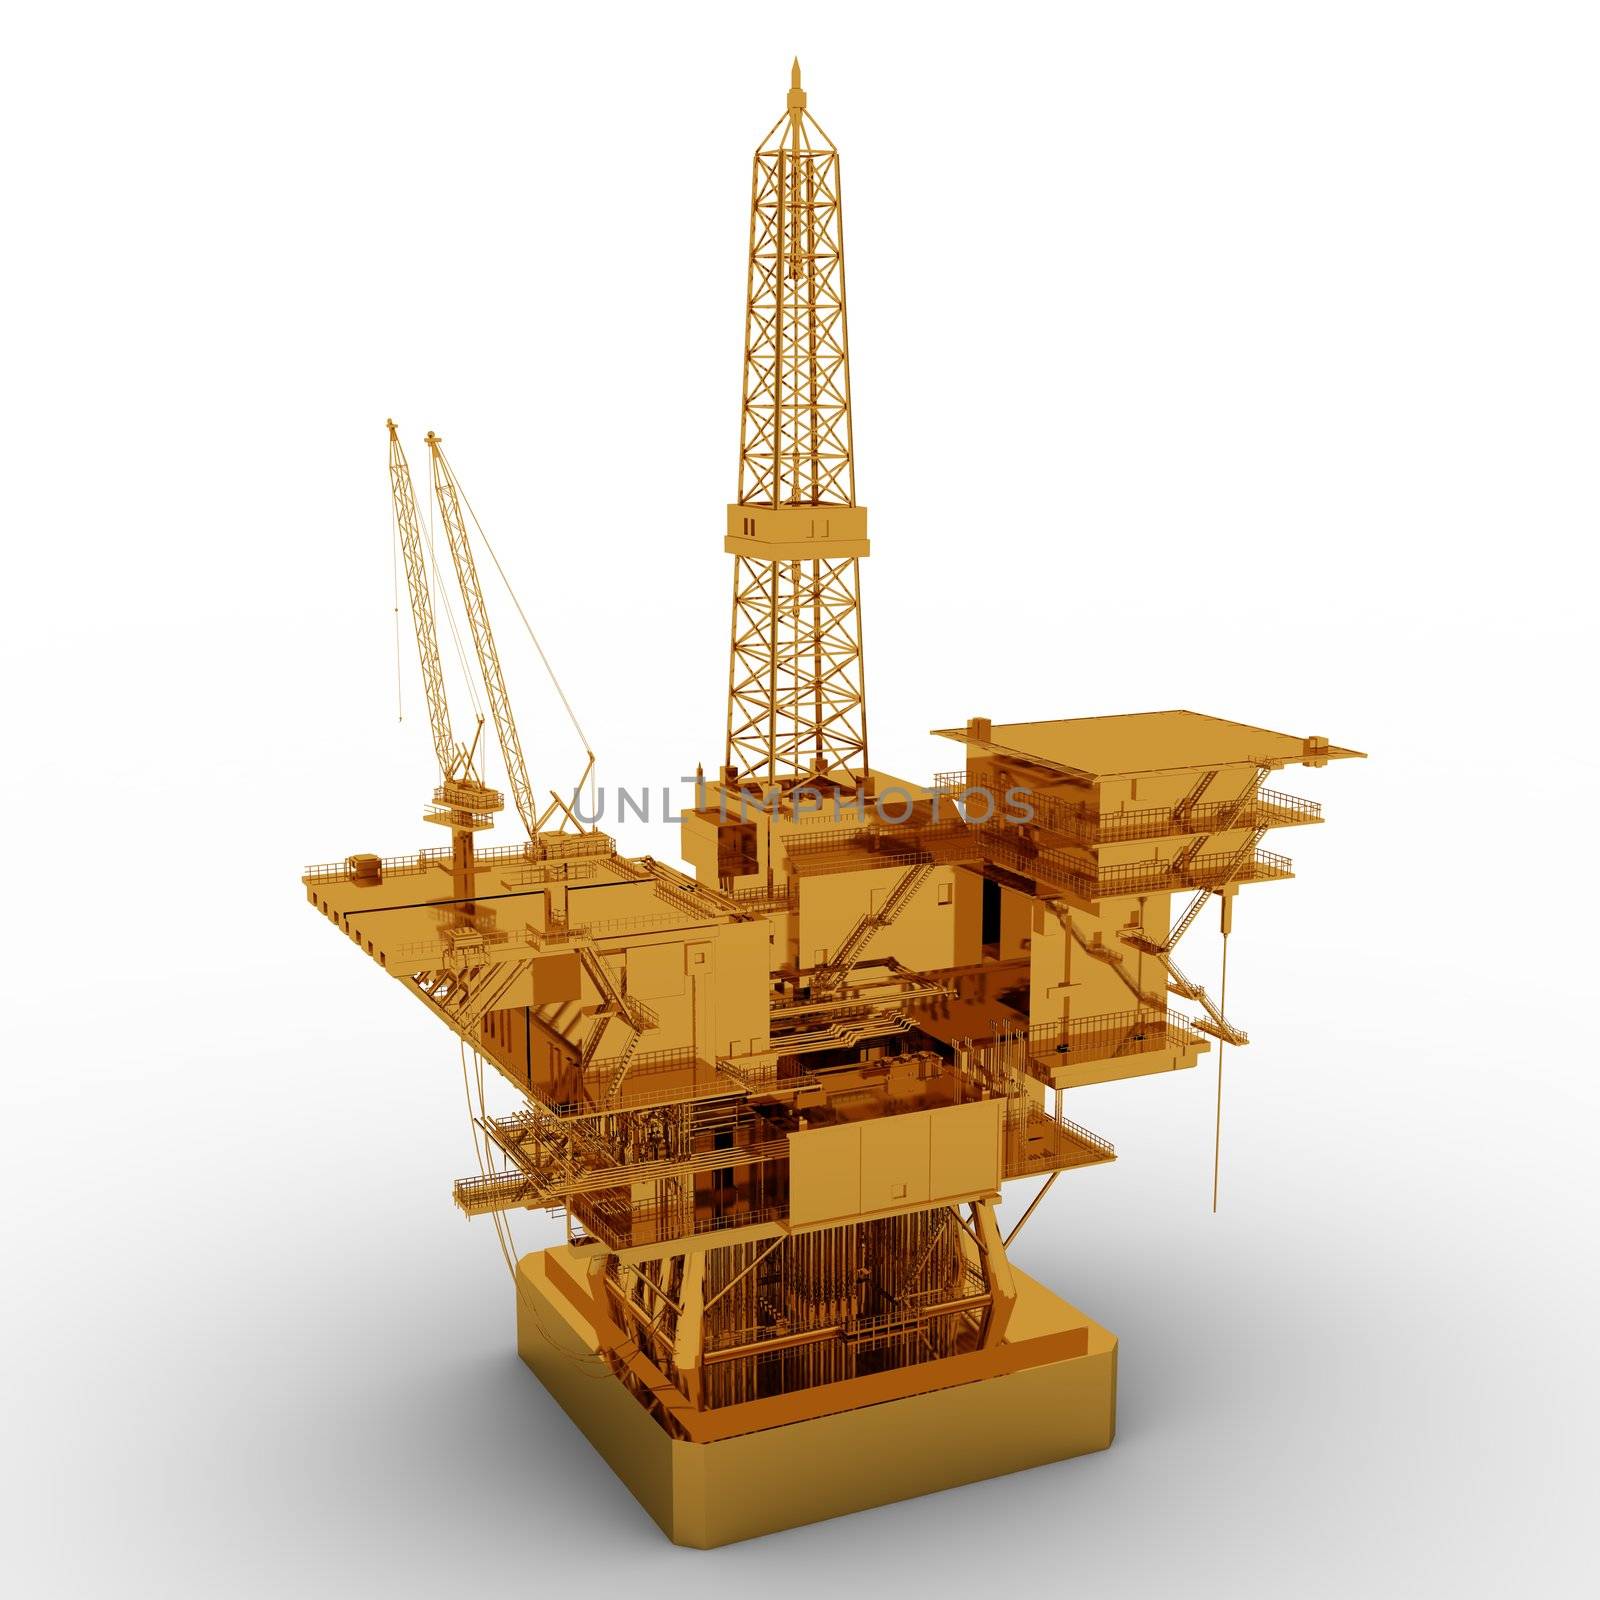 Oil Rig golden model isolated on white background by richwolf